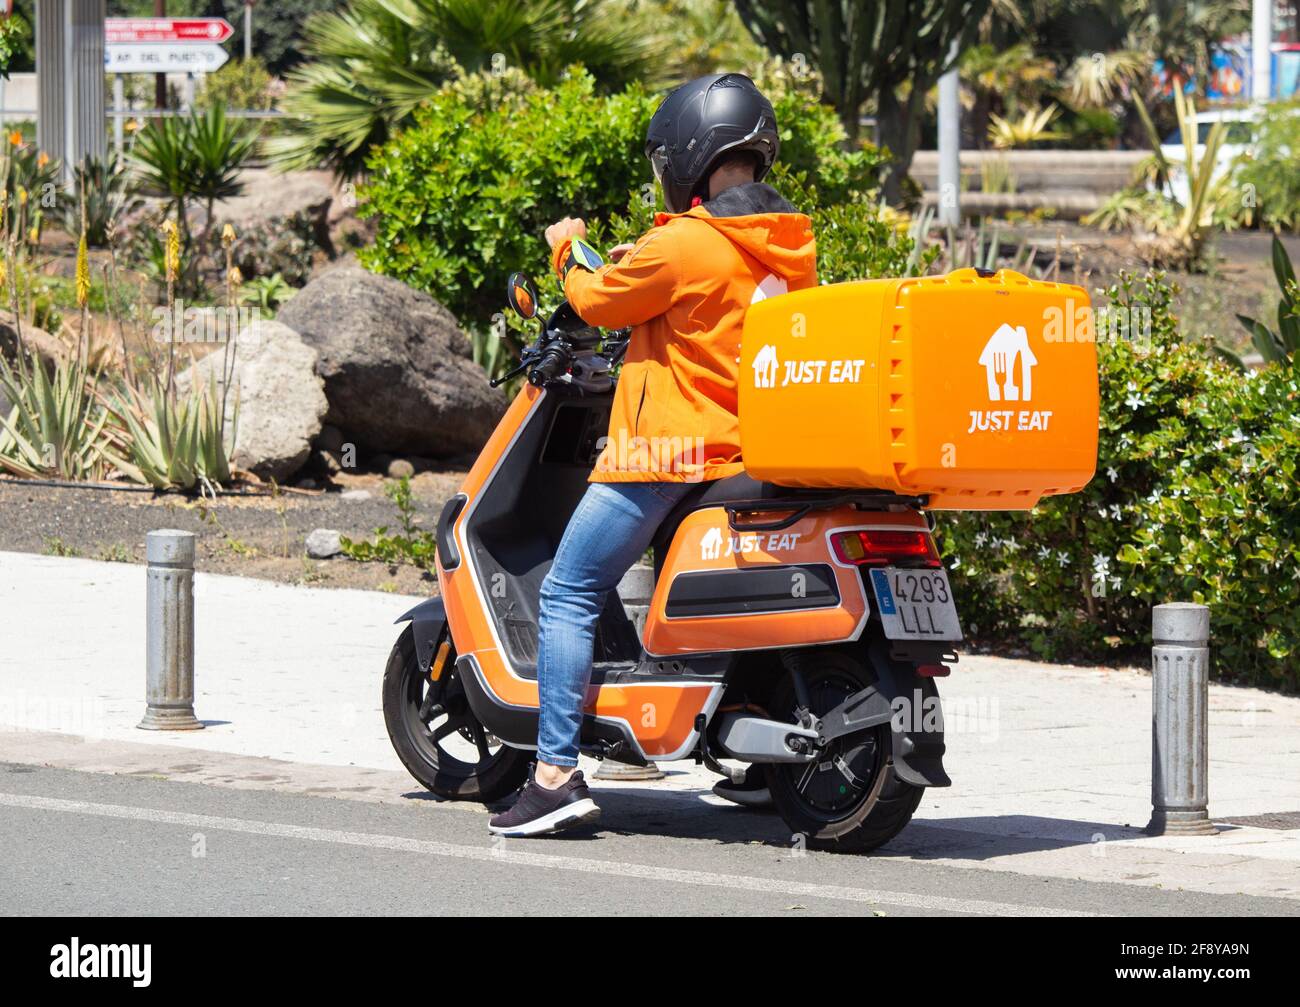 Just Eat courier delivery rider in orange uniform and Just Eat Scooter/motorbike  in Spain Stock Photo - Alamy